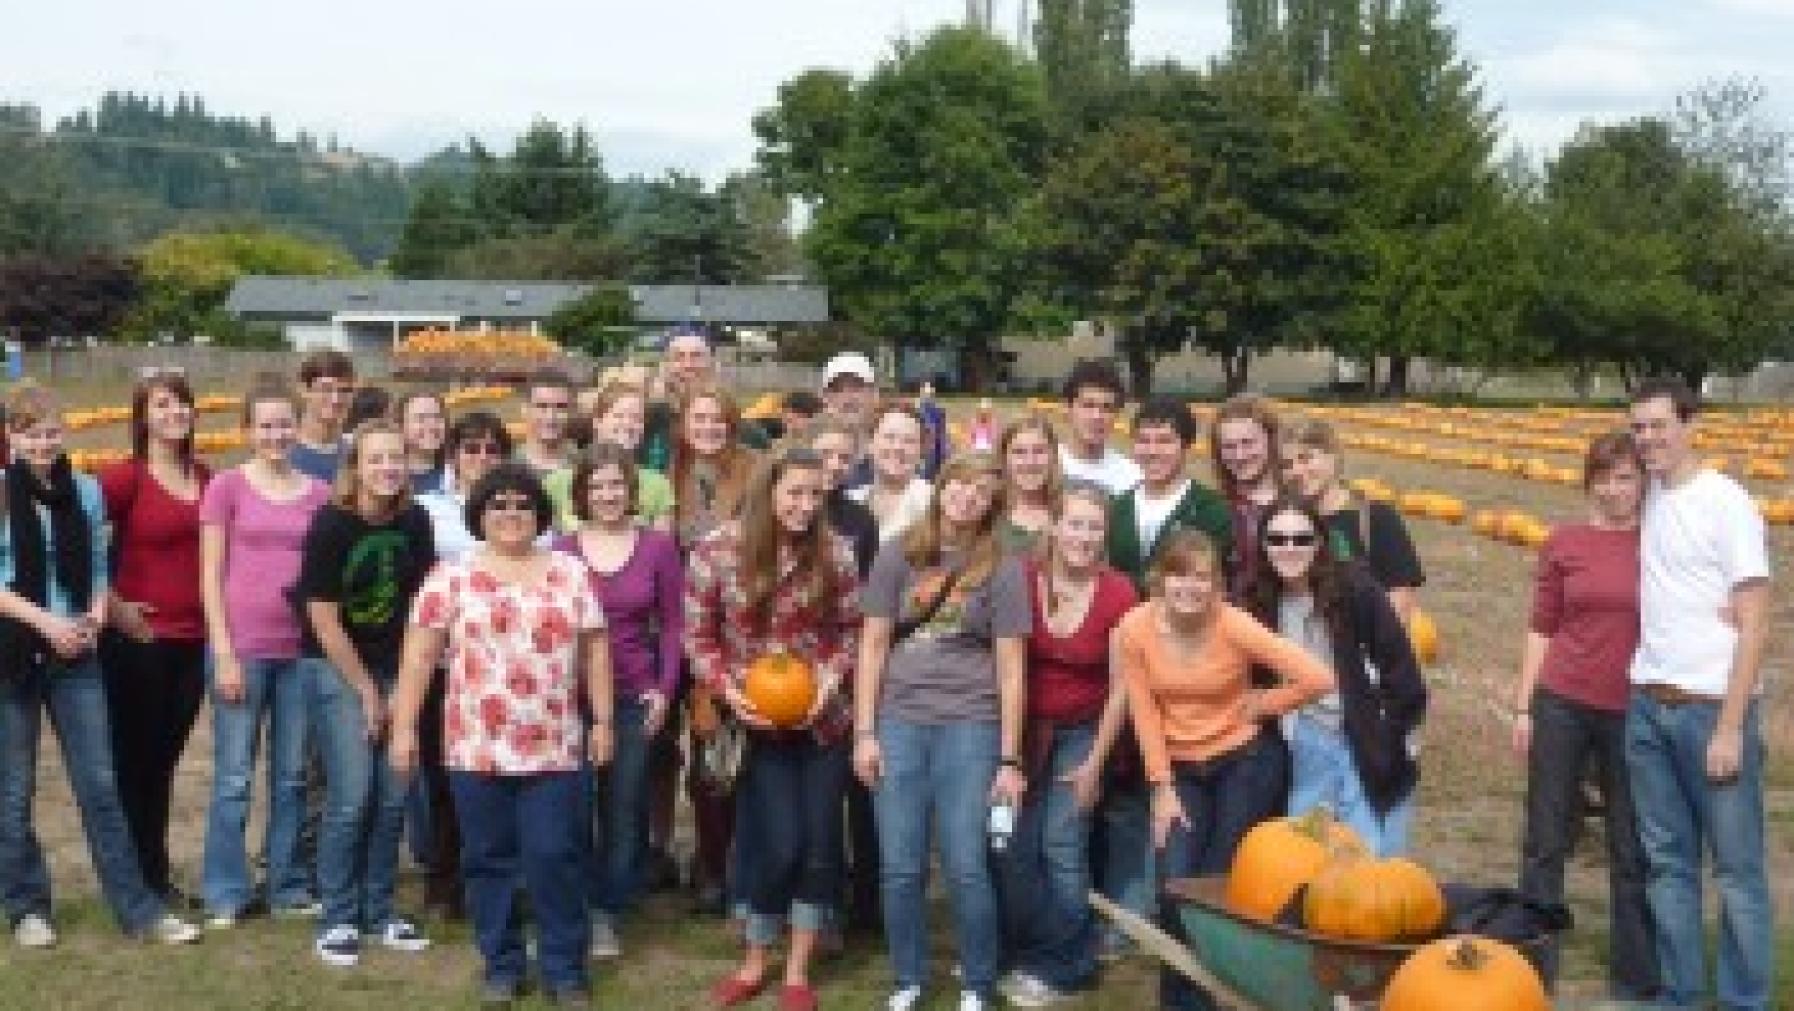 A group of people standing together in front of some pumpkins.